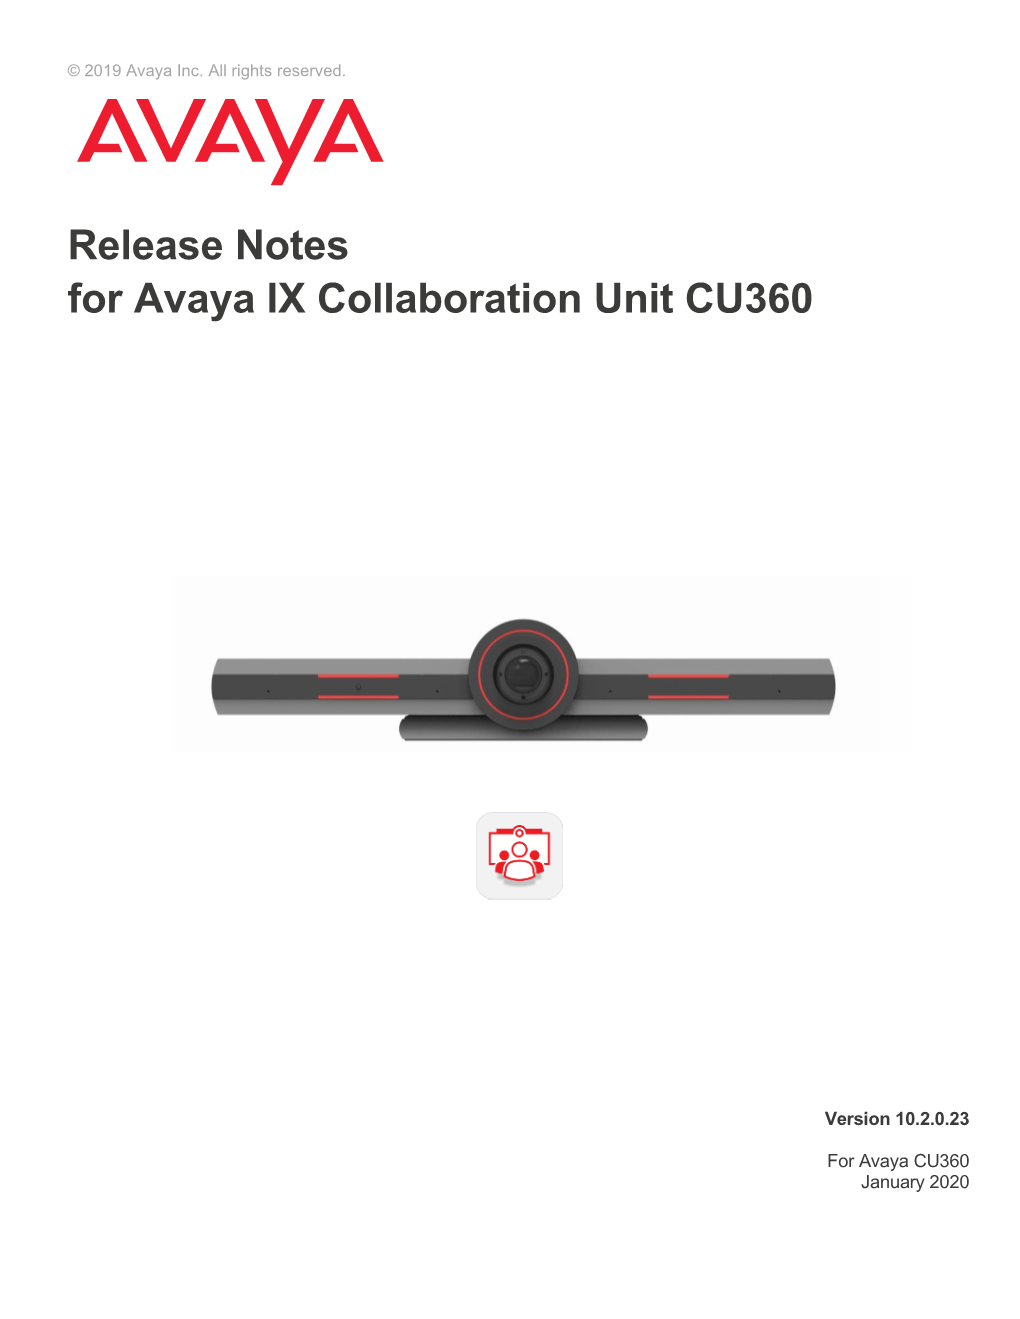 Release Notes for Avaya CU360 Collaboration Unit